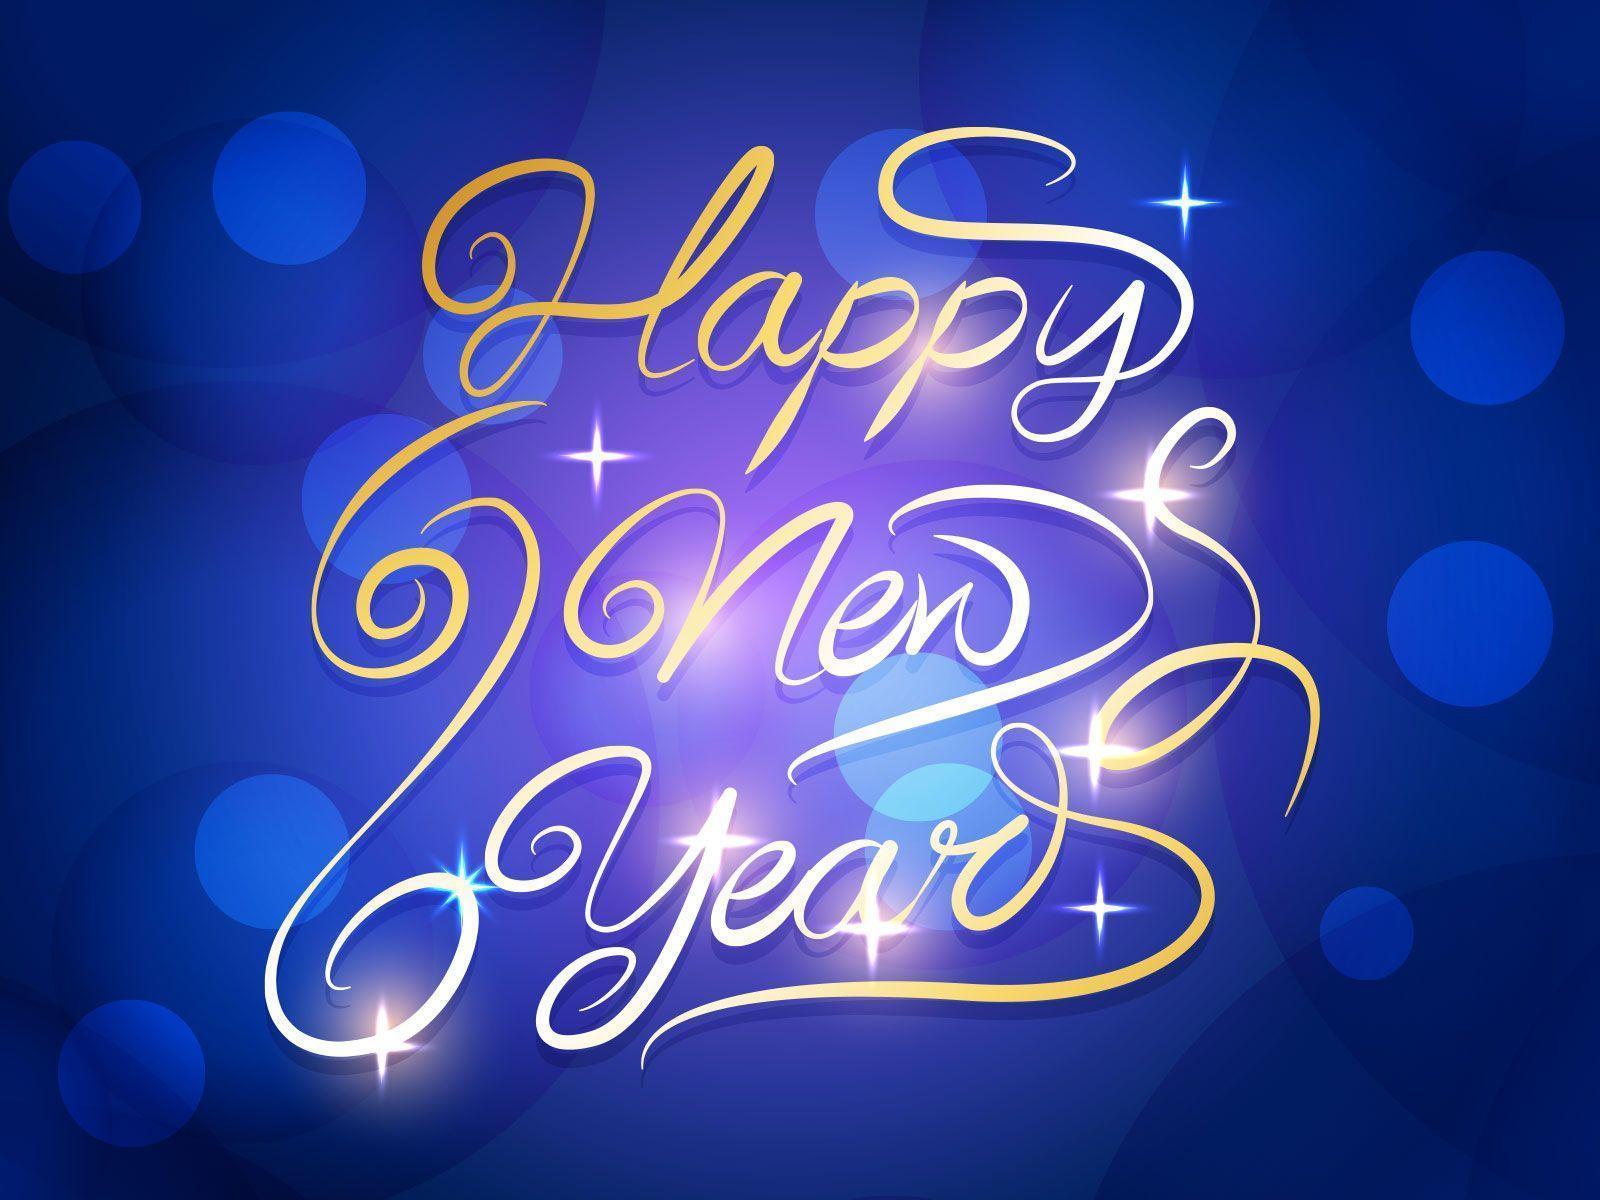 Happy New Year 2015 Wallpaper, Image & Facebook Cover photo